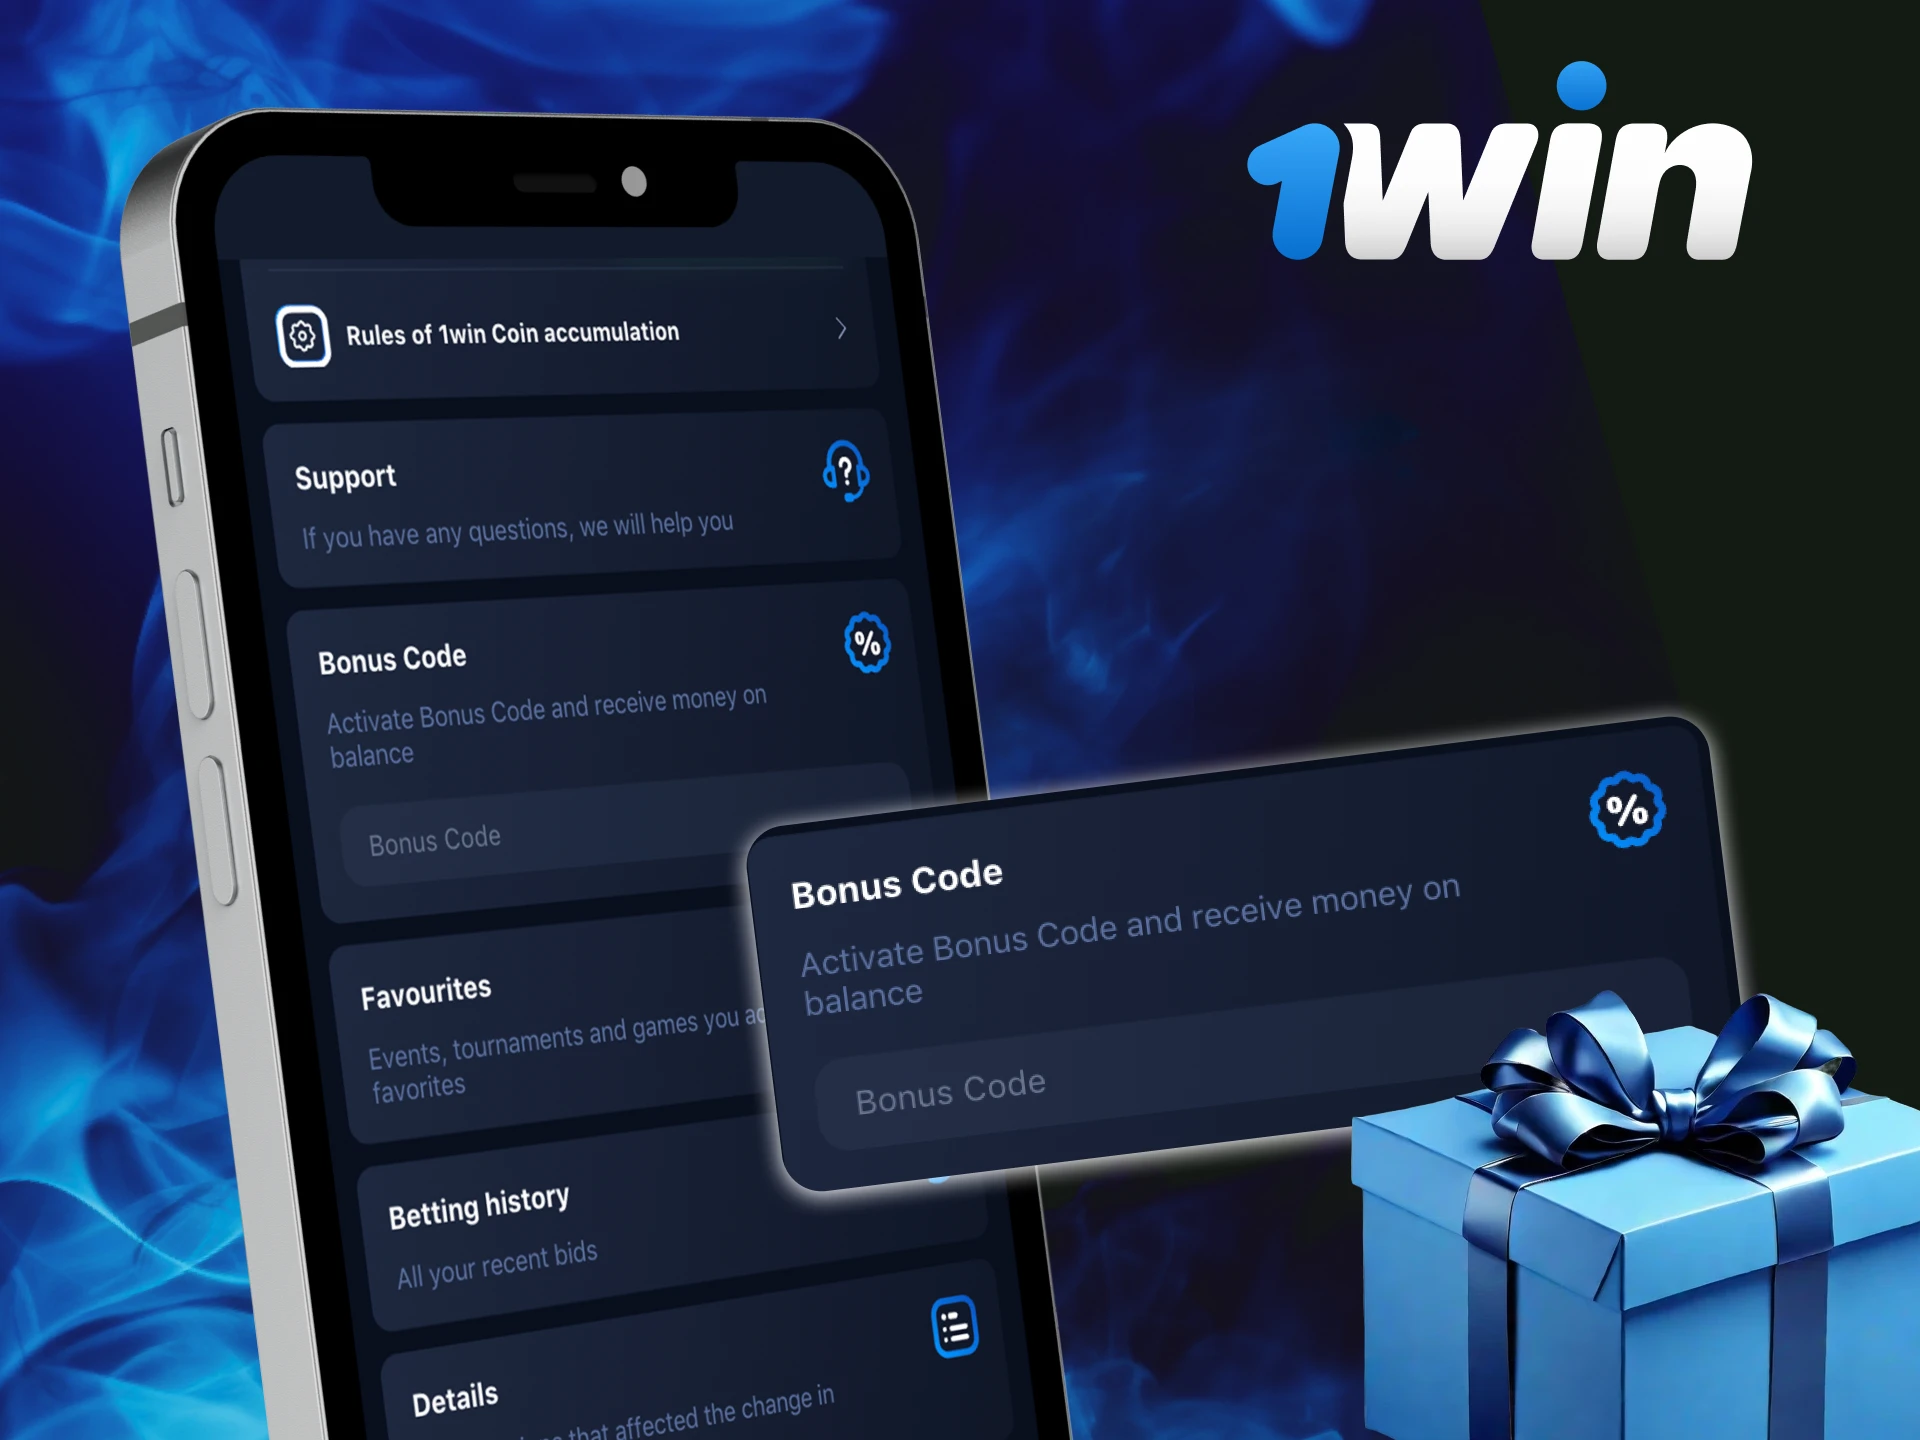 How can I use a promotional code in the 1Win casino mobile app.